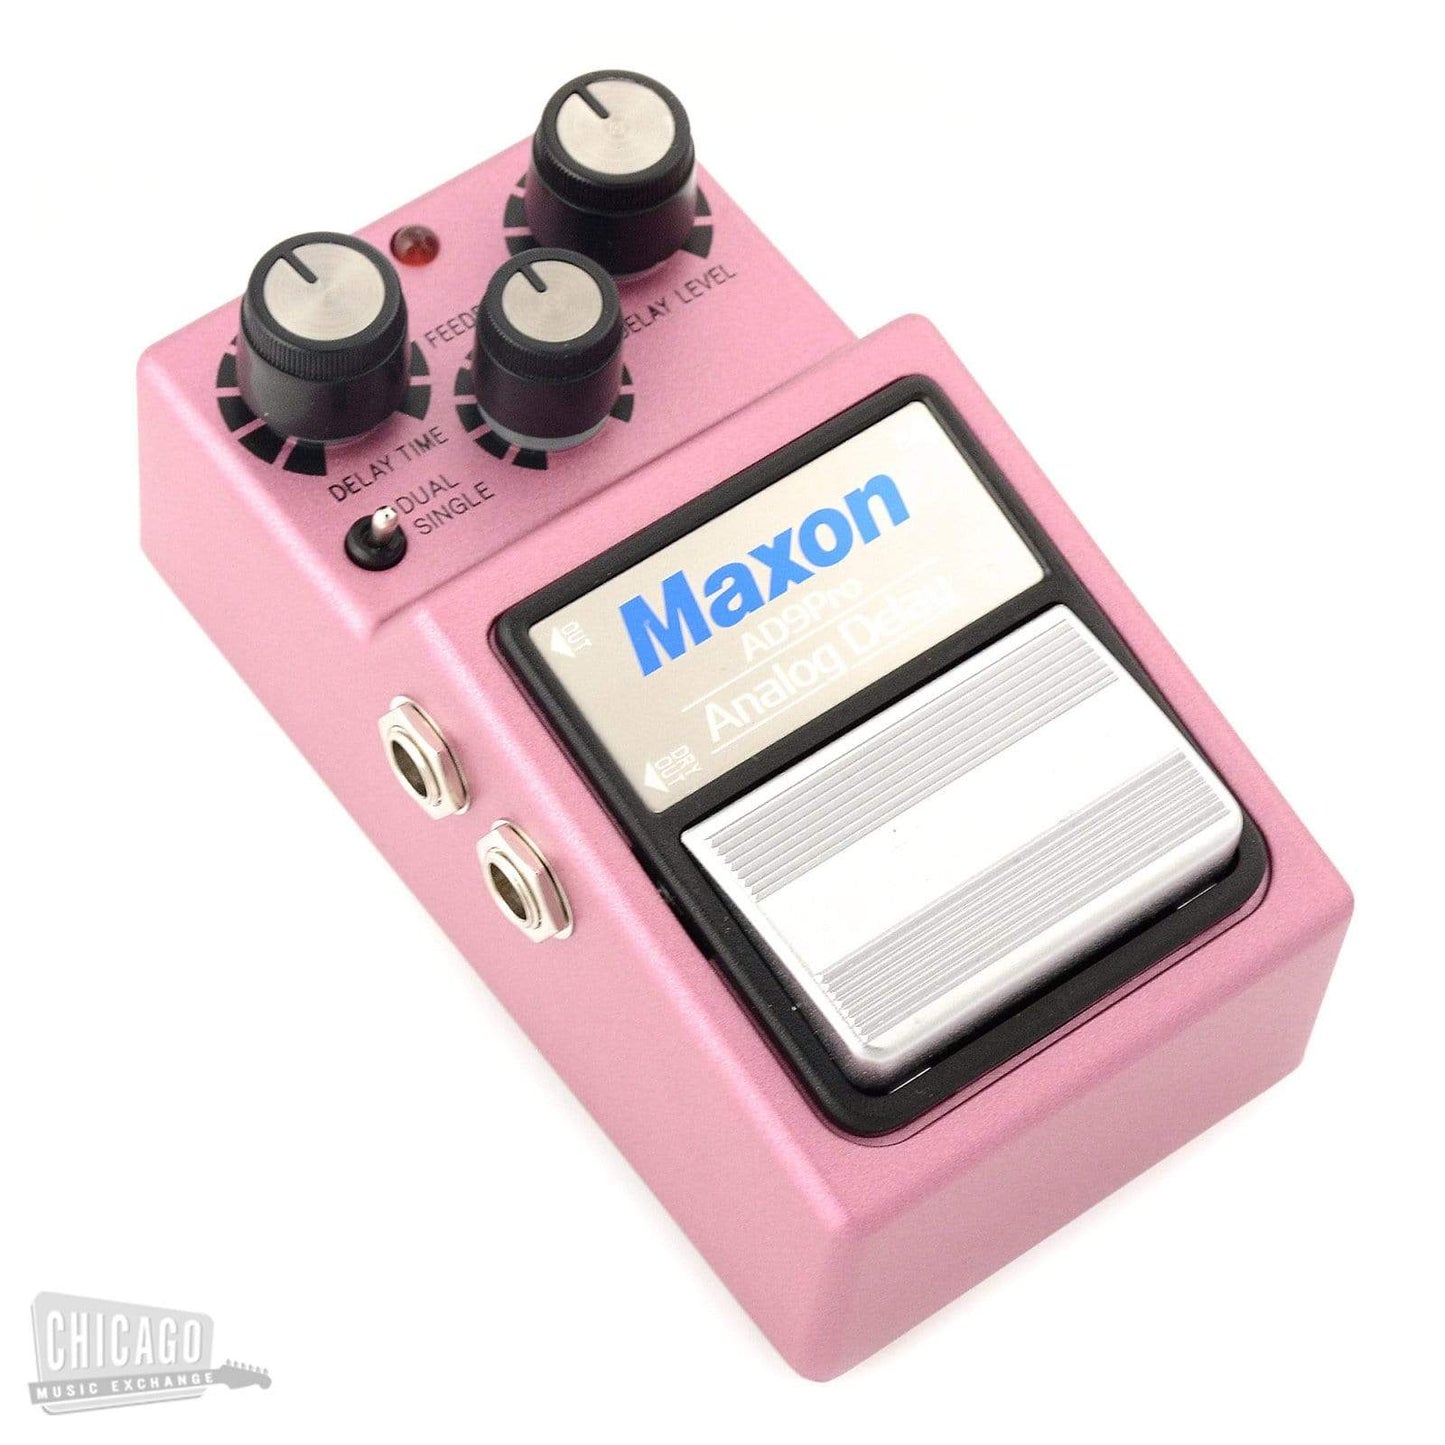 Maxon AD-9 Analog Delay Pro Effects and Pedals / Delay